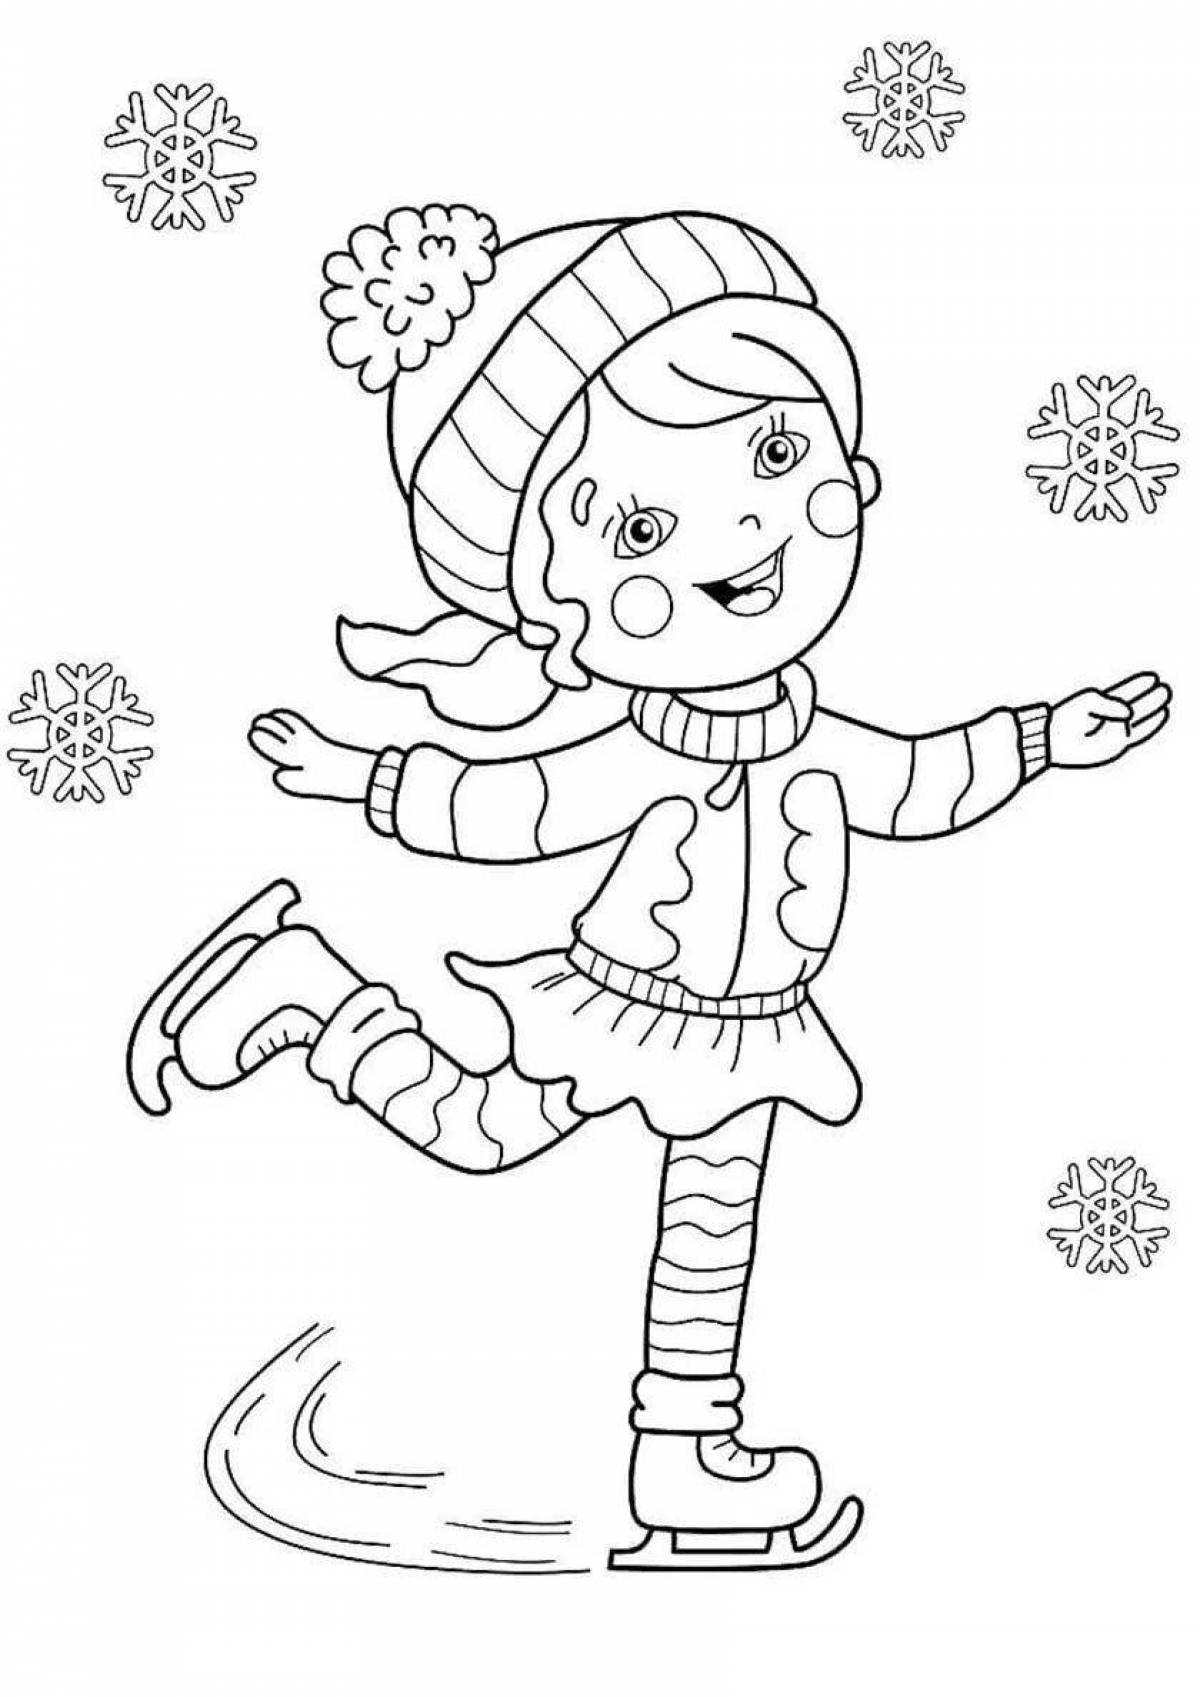 Glorious winter sports coloring page for preschoolers